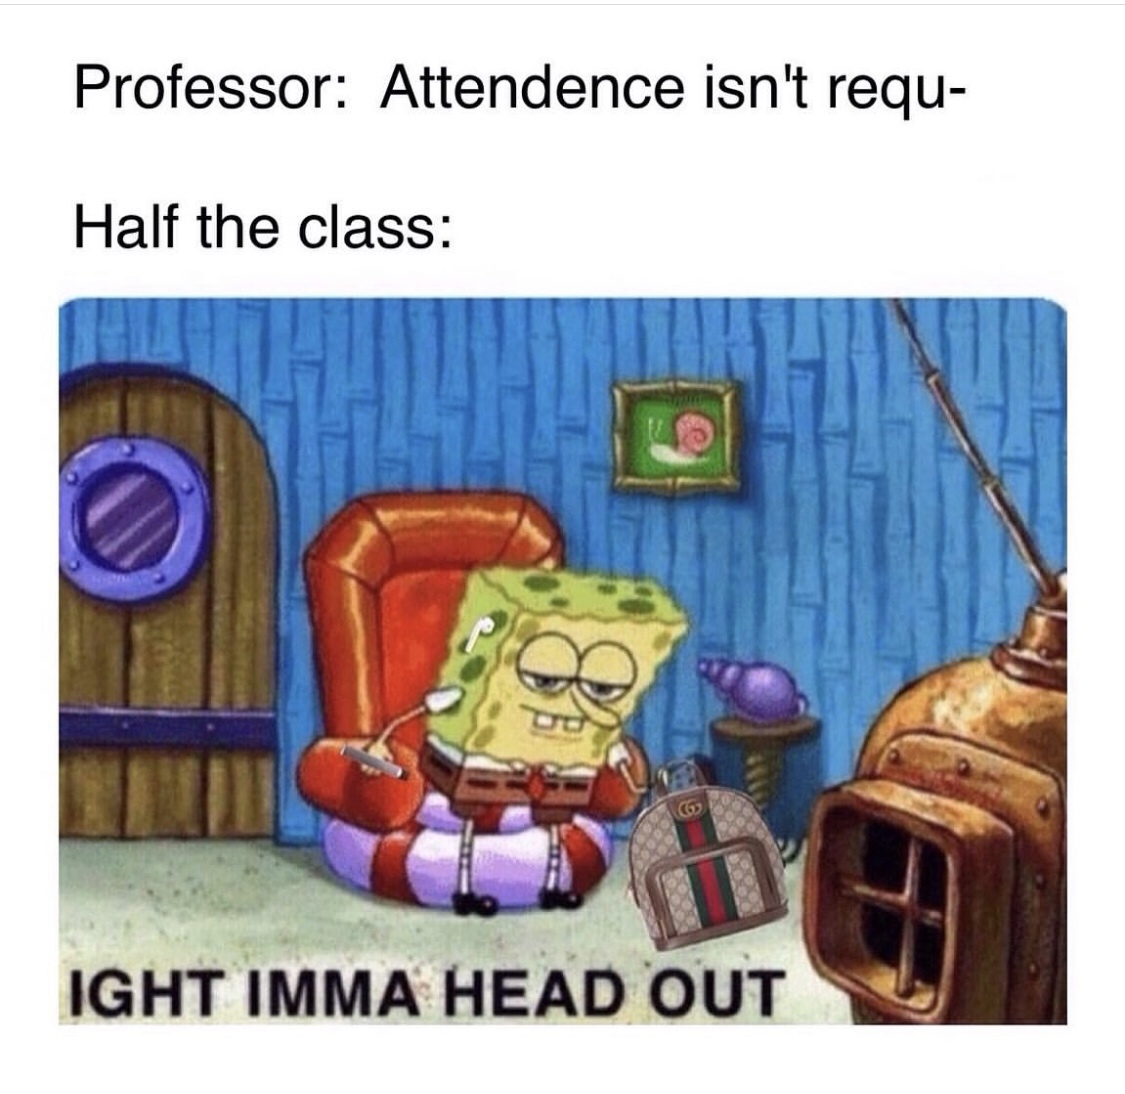 ight imma head out memes - Professor Attendence isn't requ Half the class Ight Imma Head Out